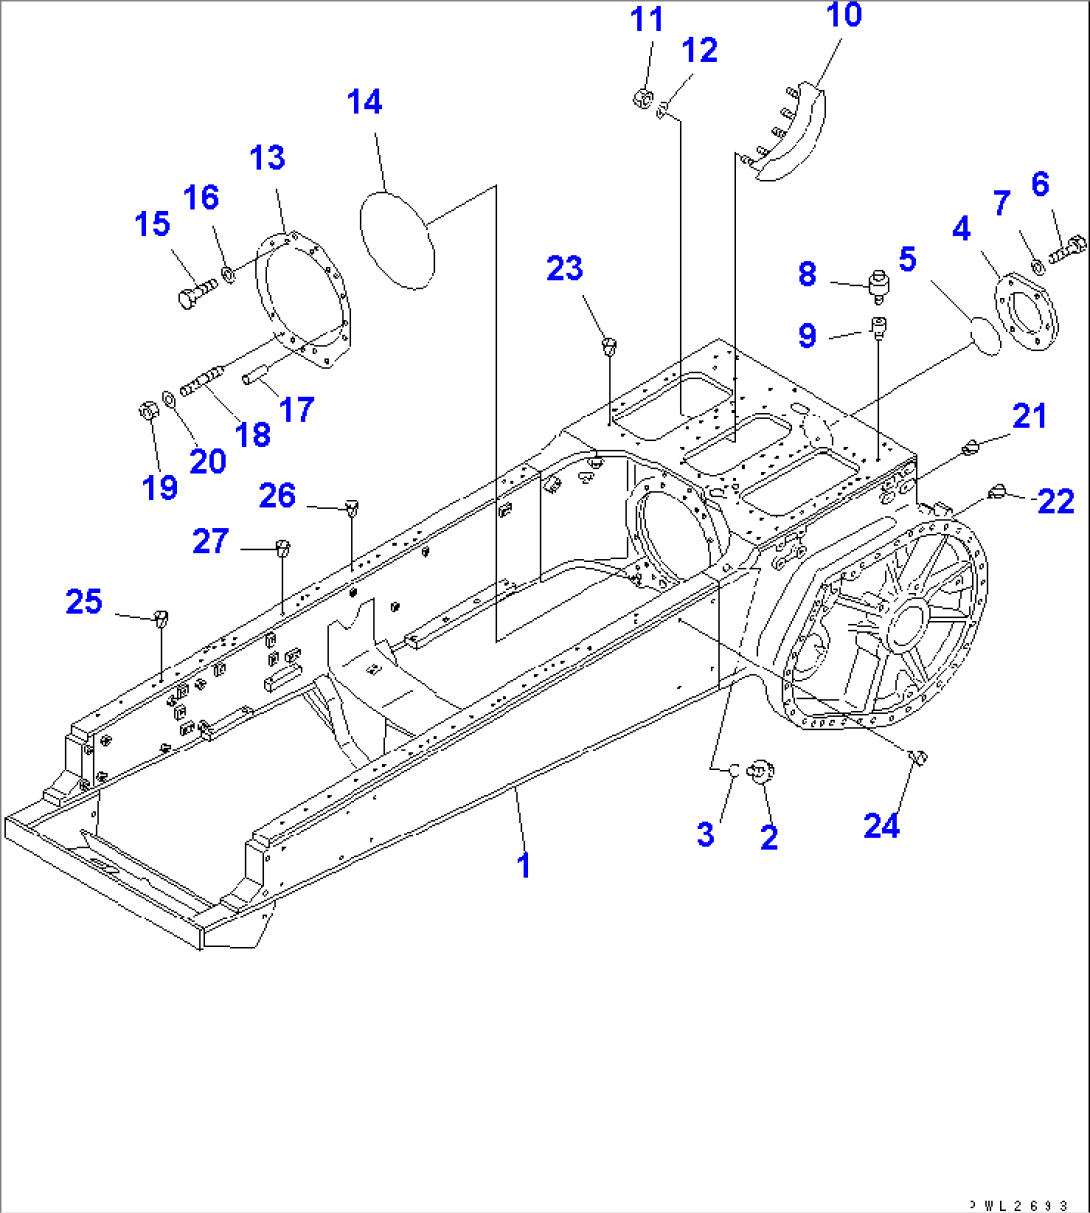 STEERING CASE AND MAIN FRAME